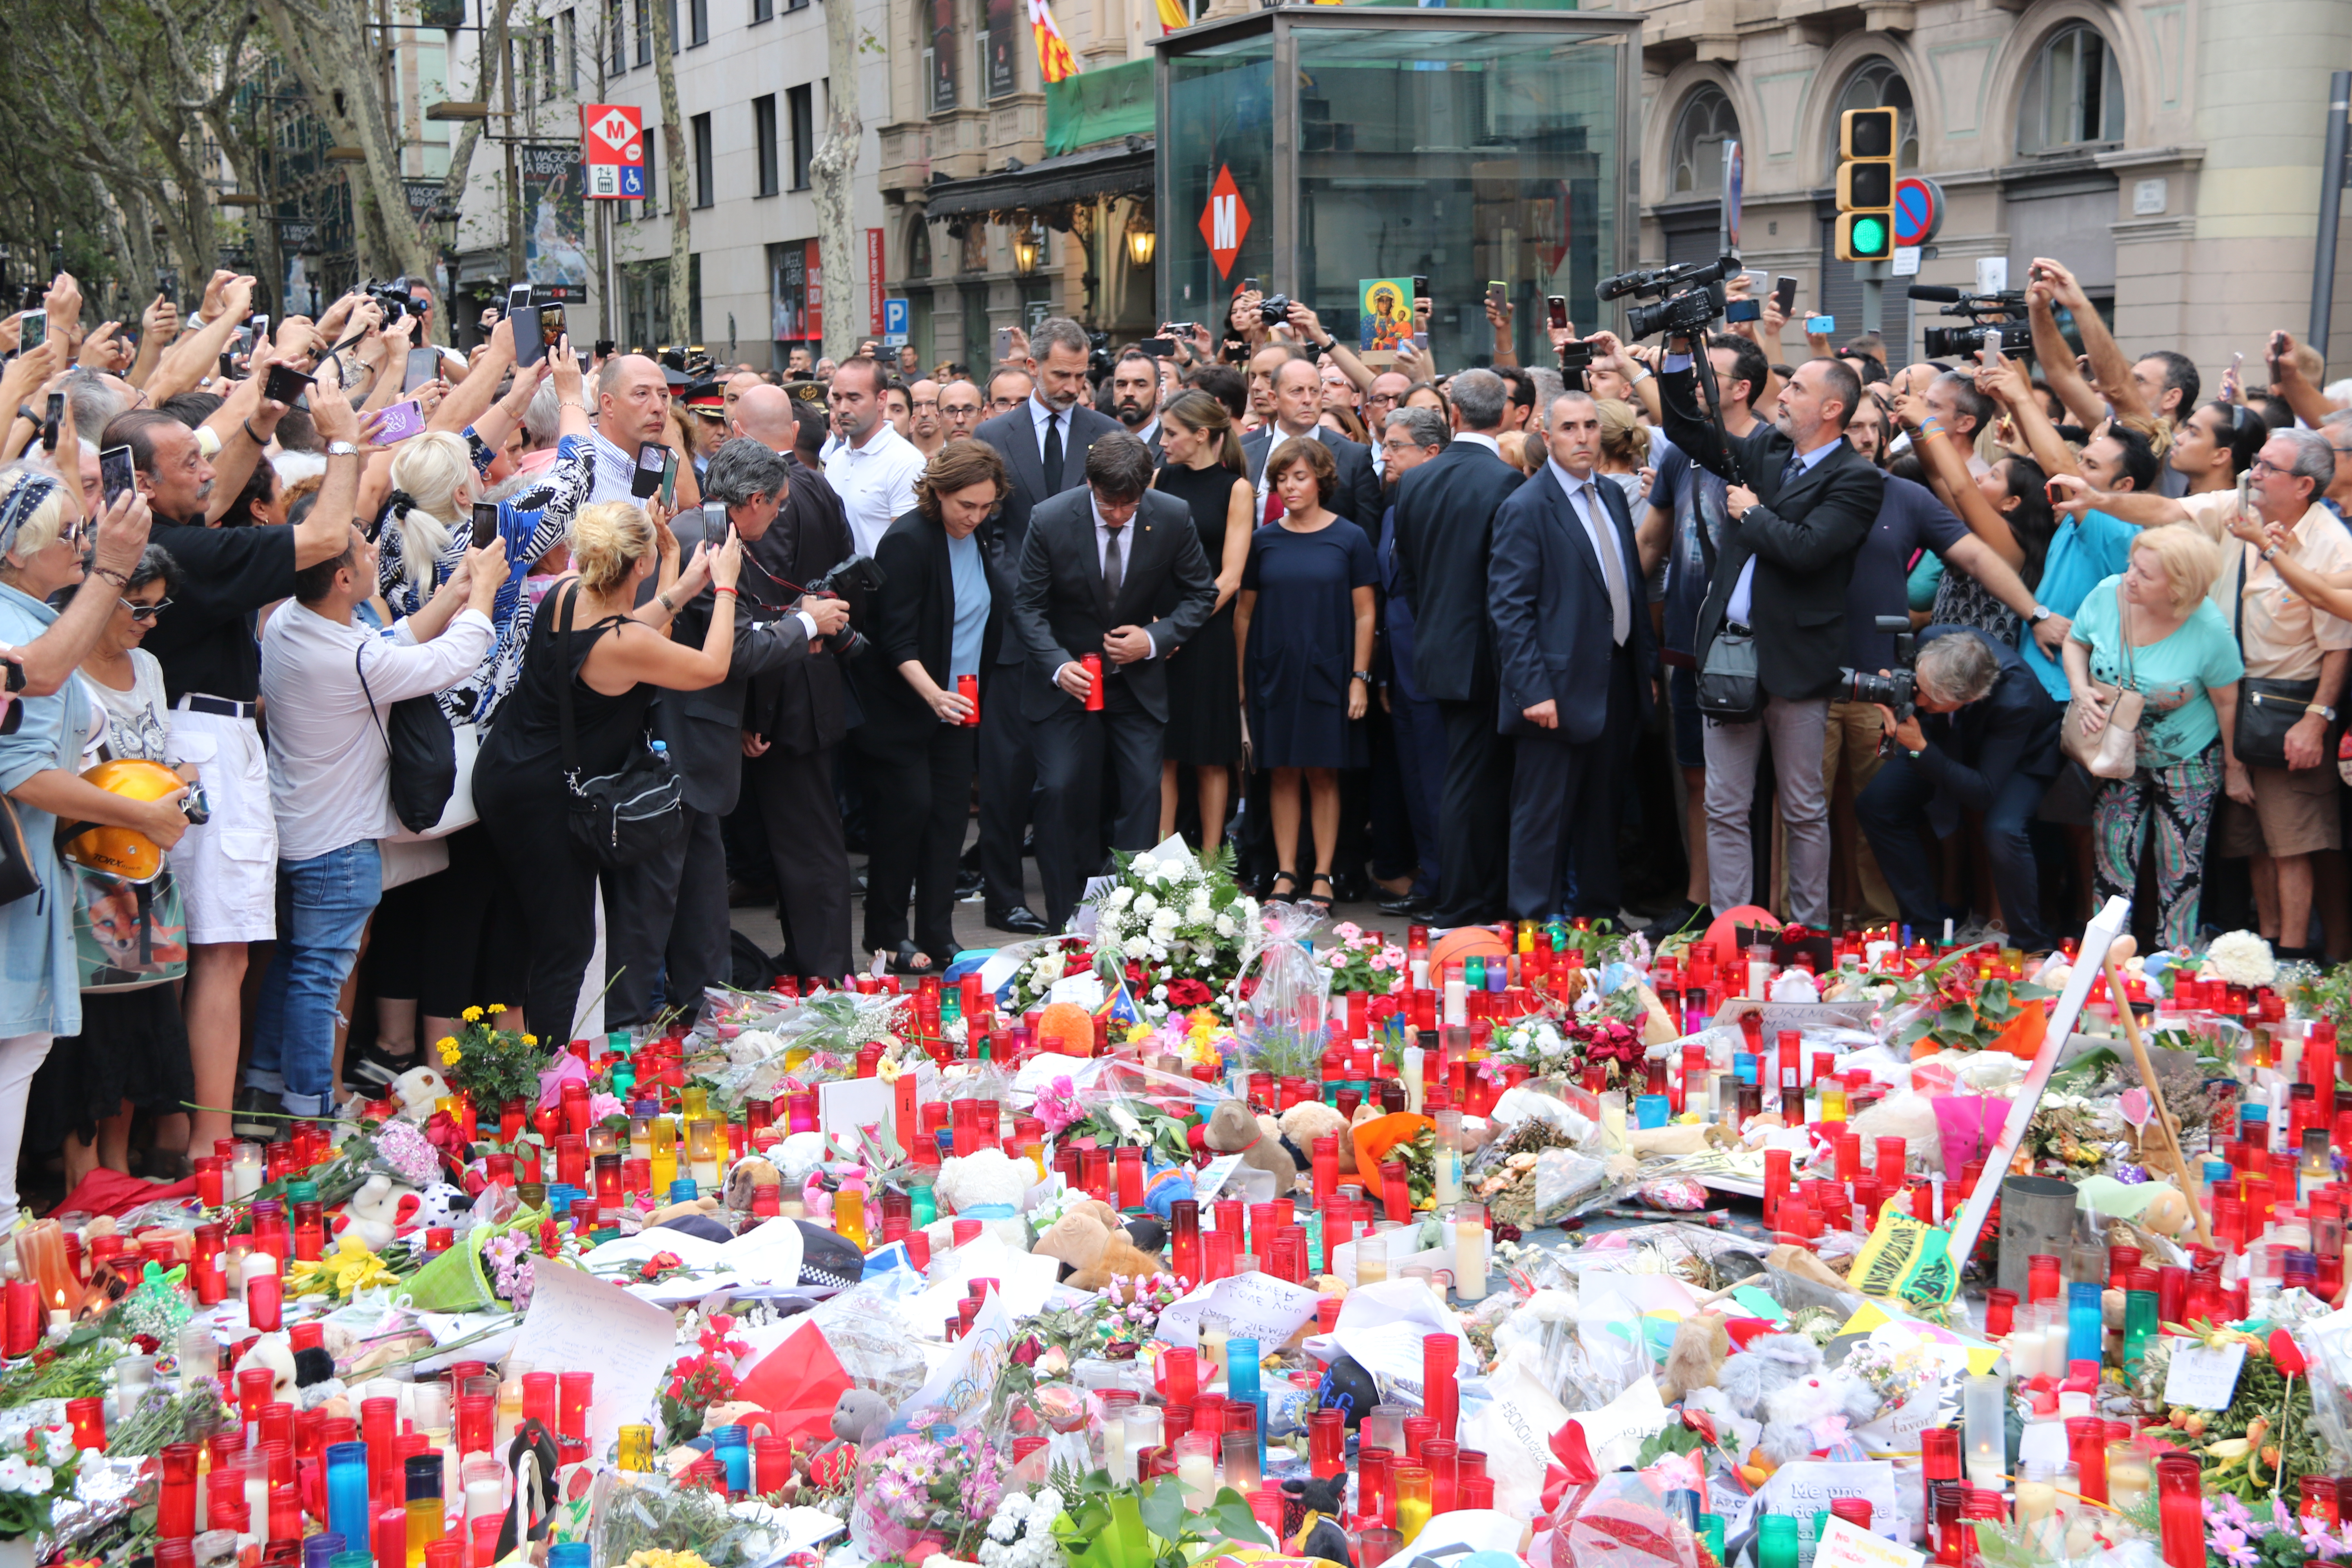 Barcelona mayor Ada Colau and president Carles Puigdemont paying their respects to victims of August attacks (by ACN)